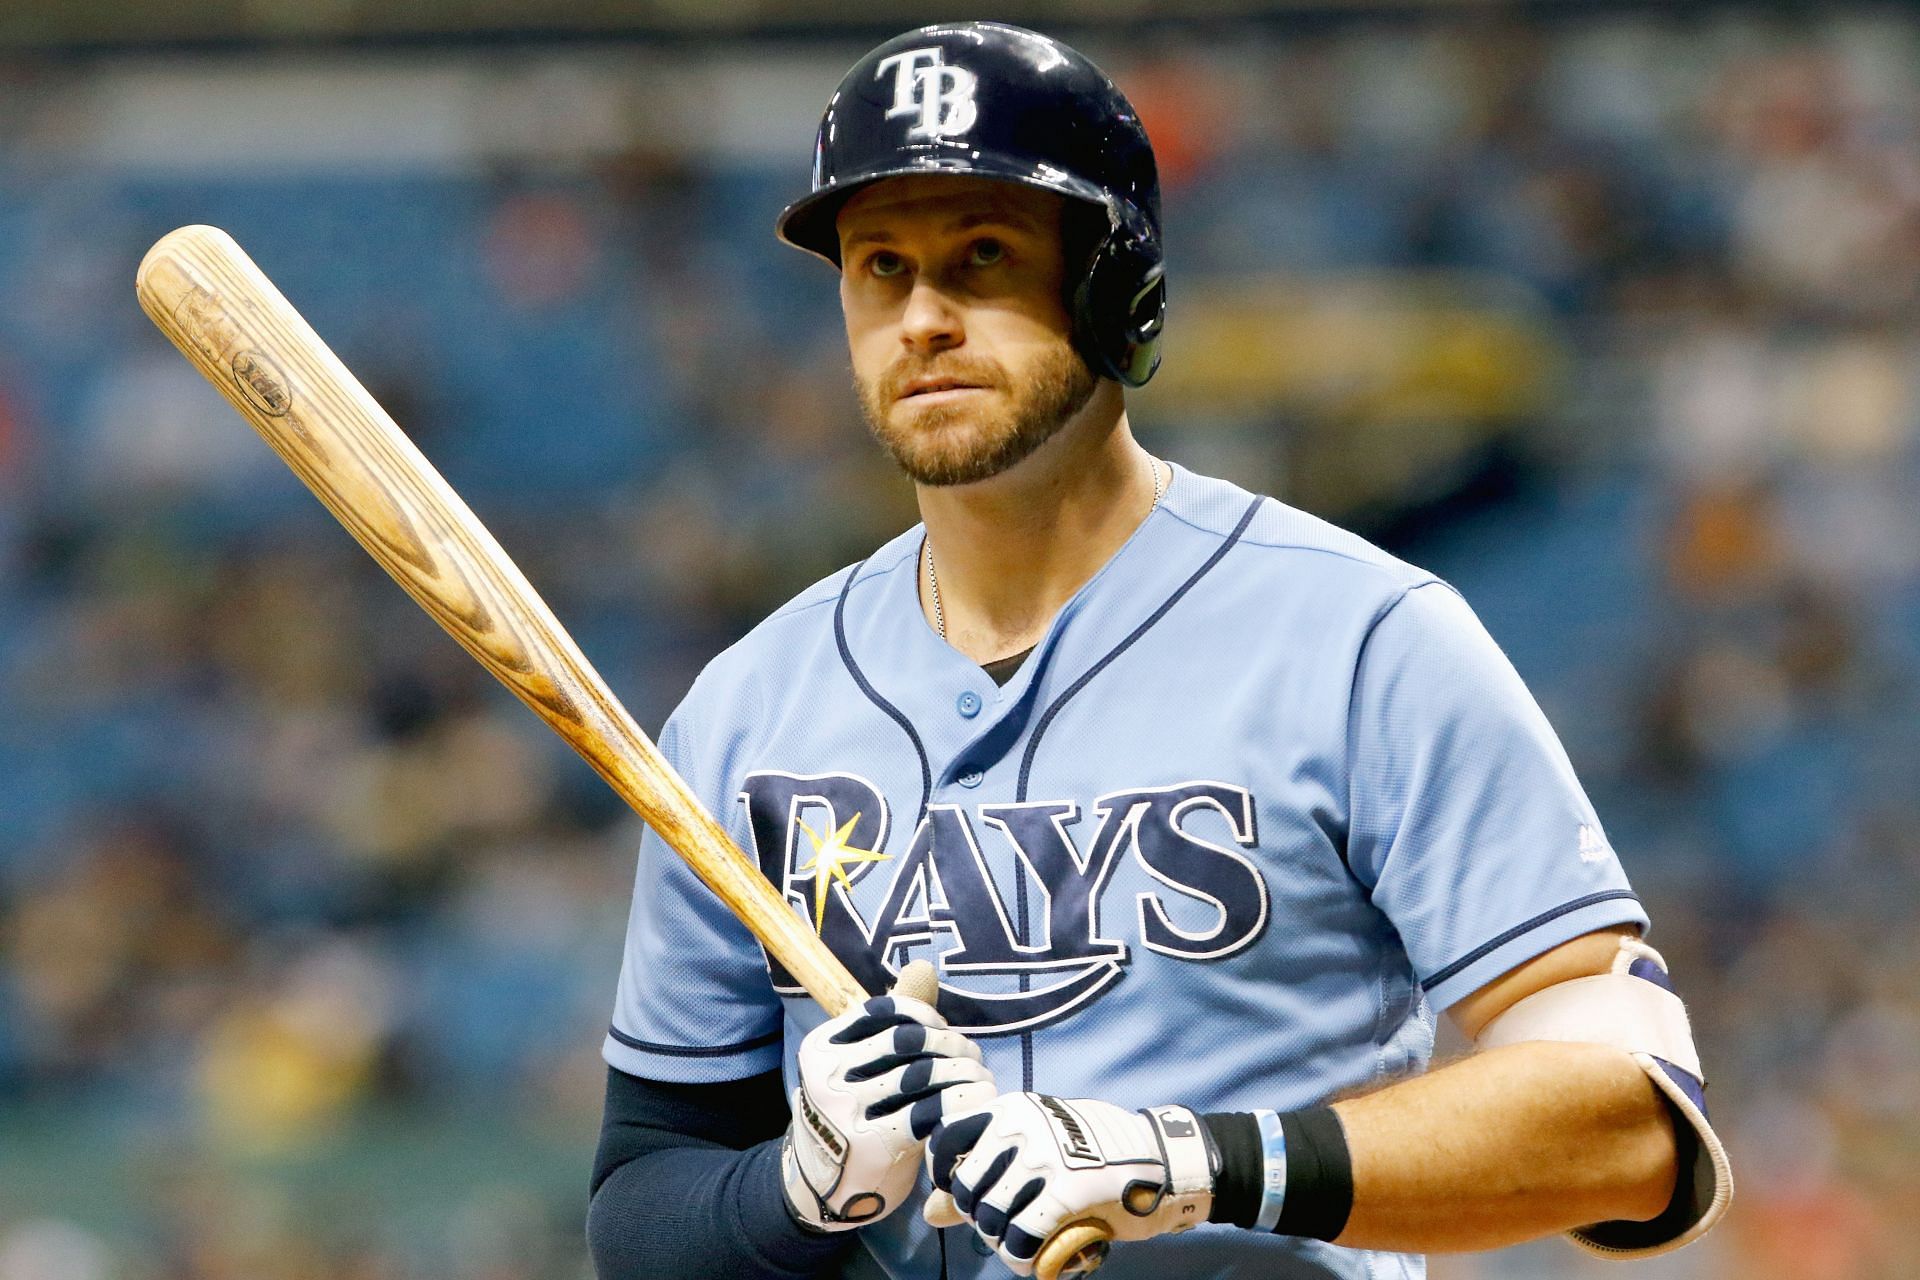 Viral Video of the Day: Evan Longoria saves reporter from baseball